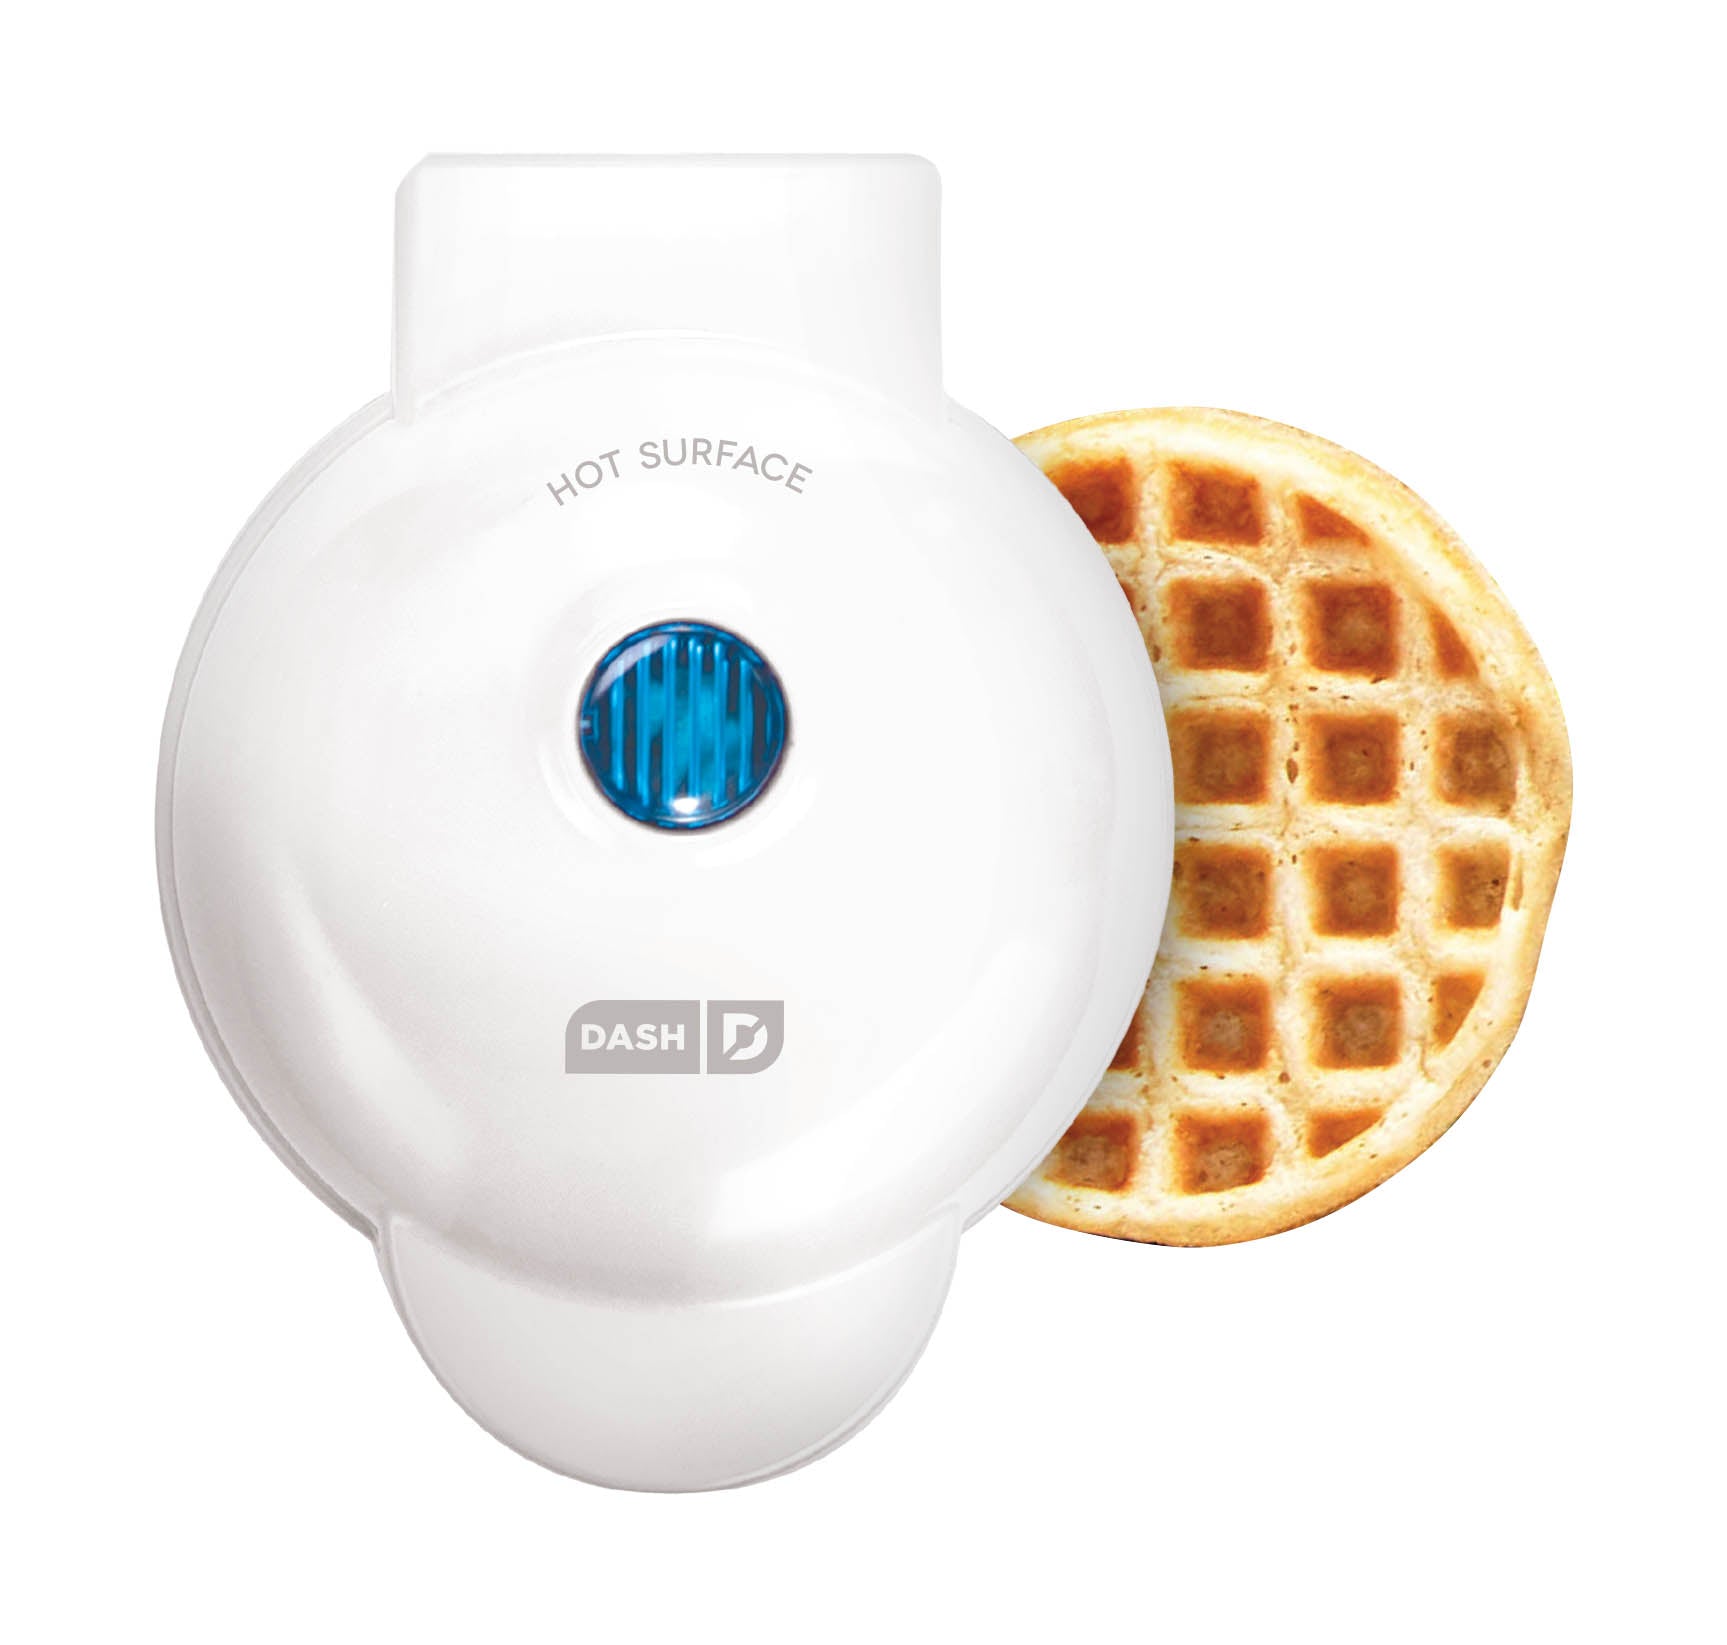  DASH Mini Waffle Maker Machine for Individuals, Paninis, Hash  Browns, & Other On the Go Breakfast, Lunch, or Snacks & Mini Maker Electric  Round Griddle for Individual Pancakes, Cookies, Eggs: Home